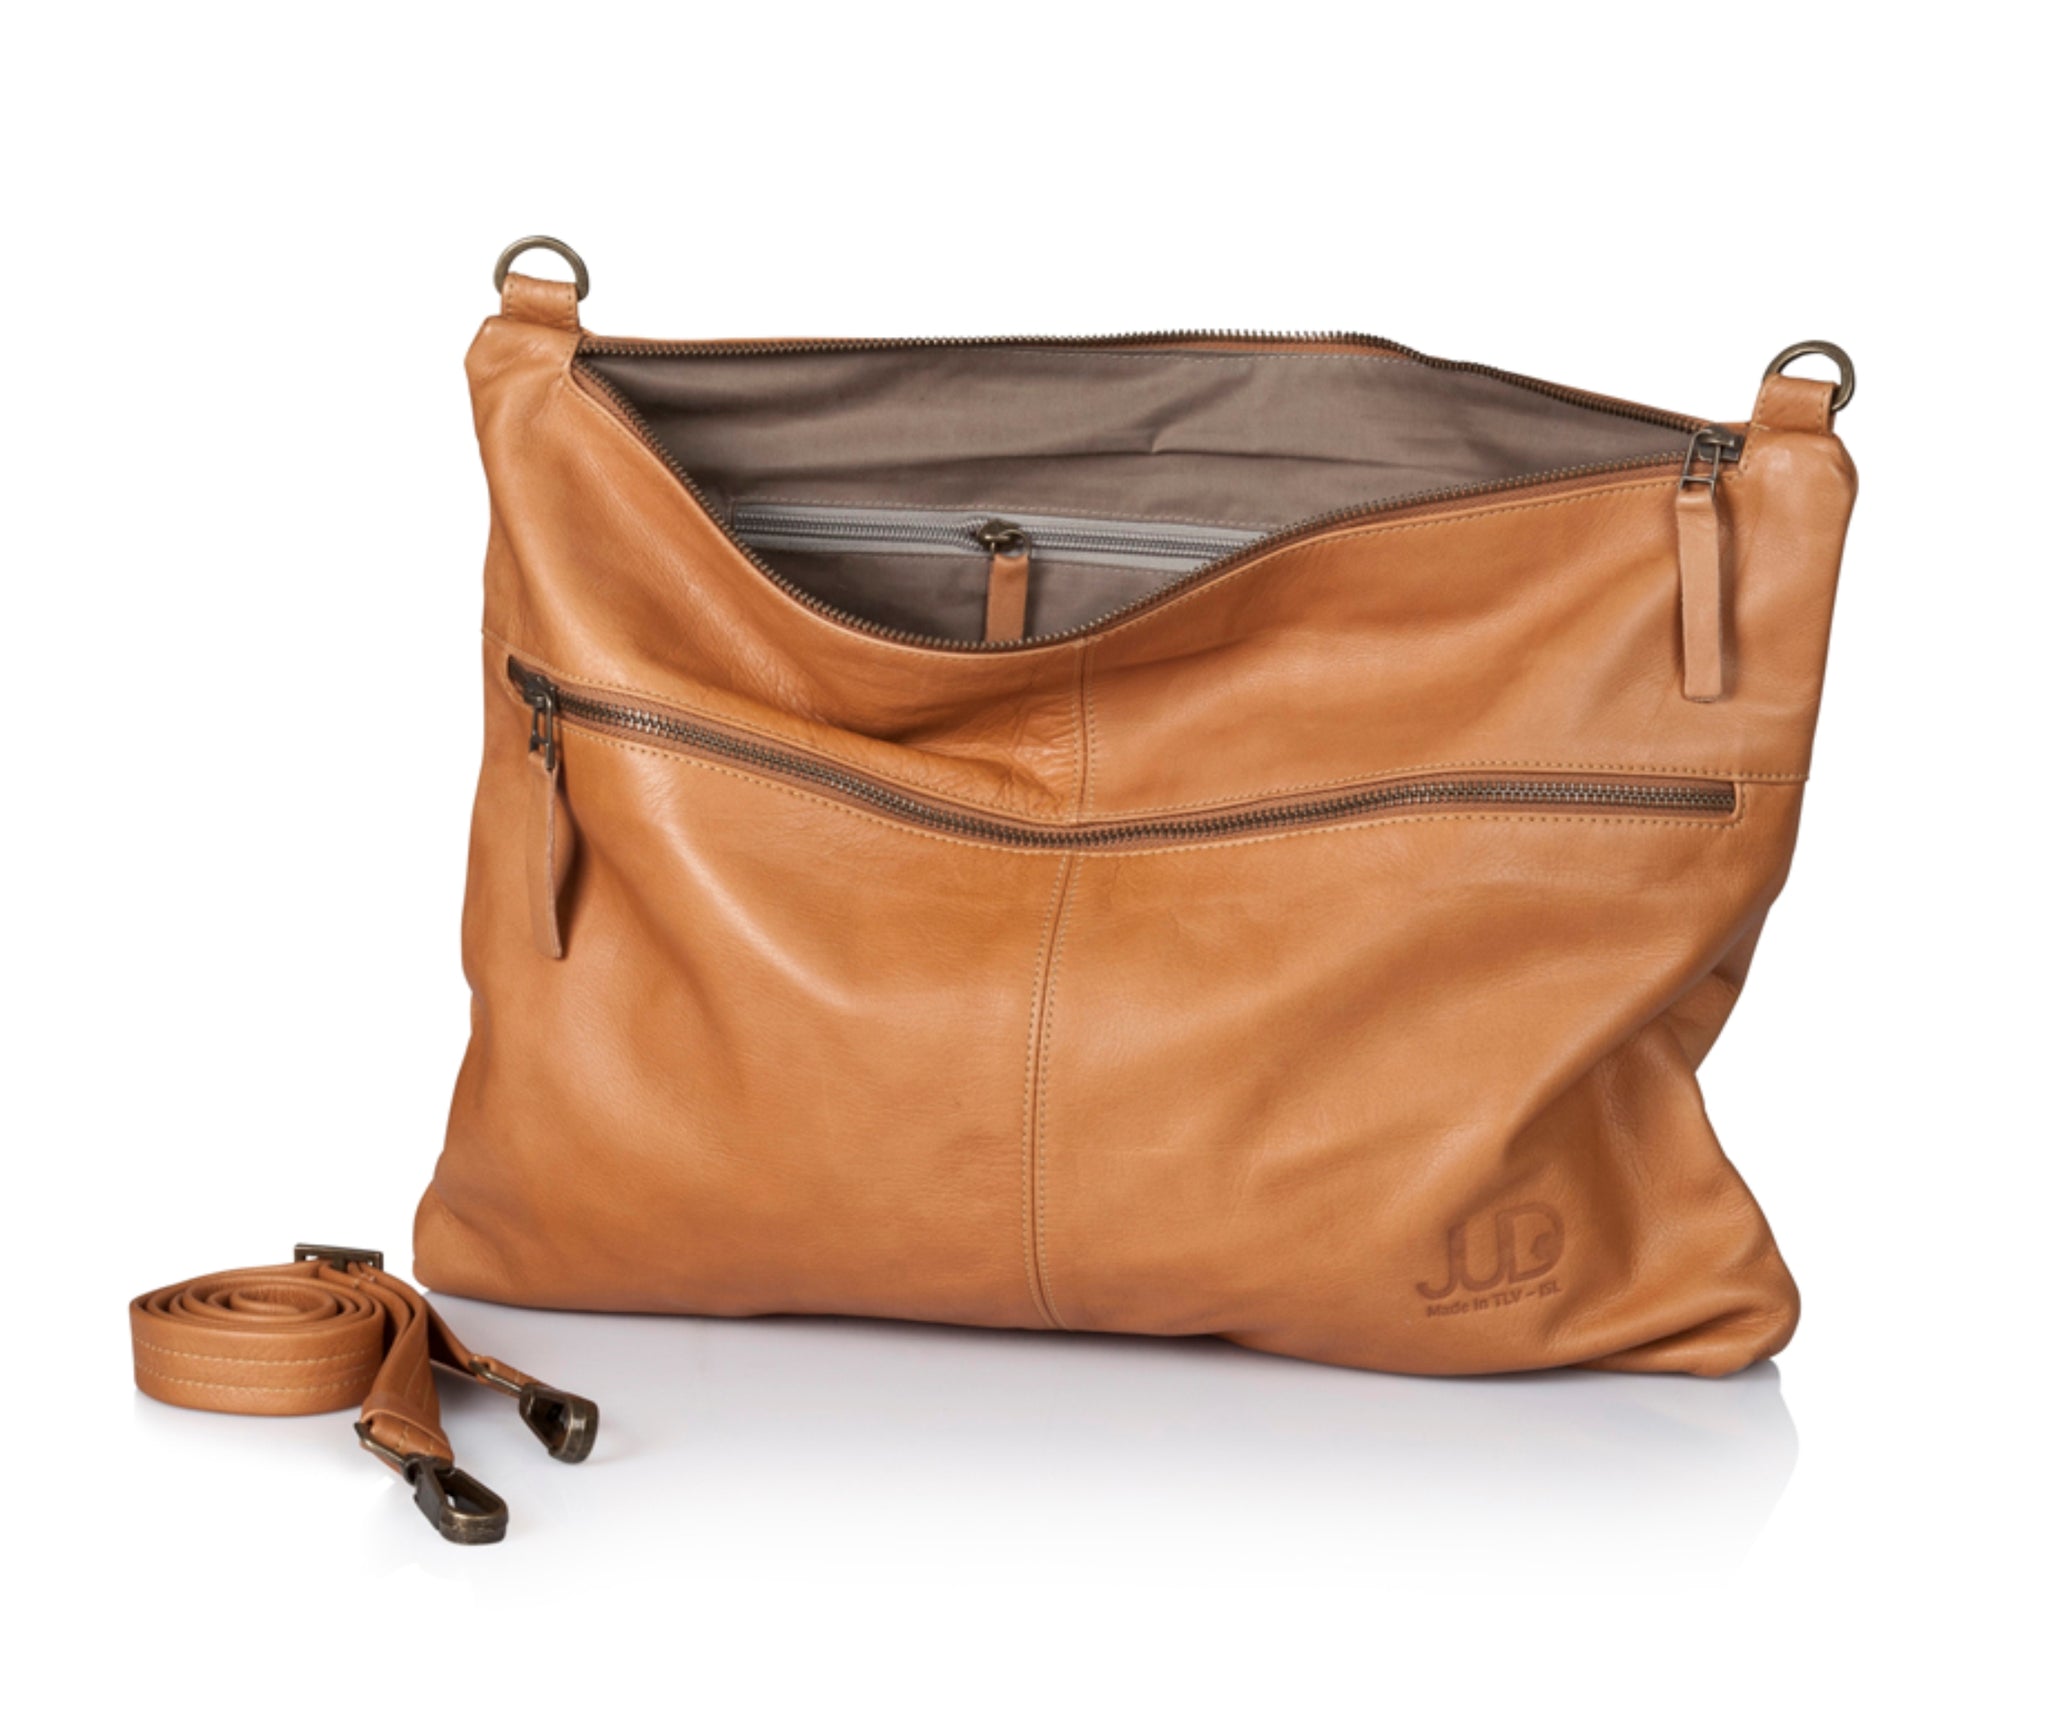 Camel brown designer messenger bag handmade with soft Italian Napa leather suitable for laptops up to 17in with adjustable & detachable matching leather strap can be carries as a crossbody bag, shoulder bag, oversized clutch